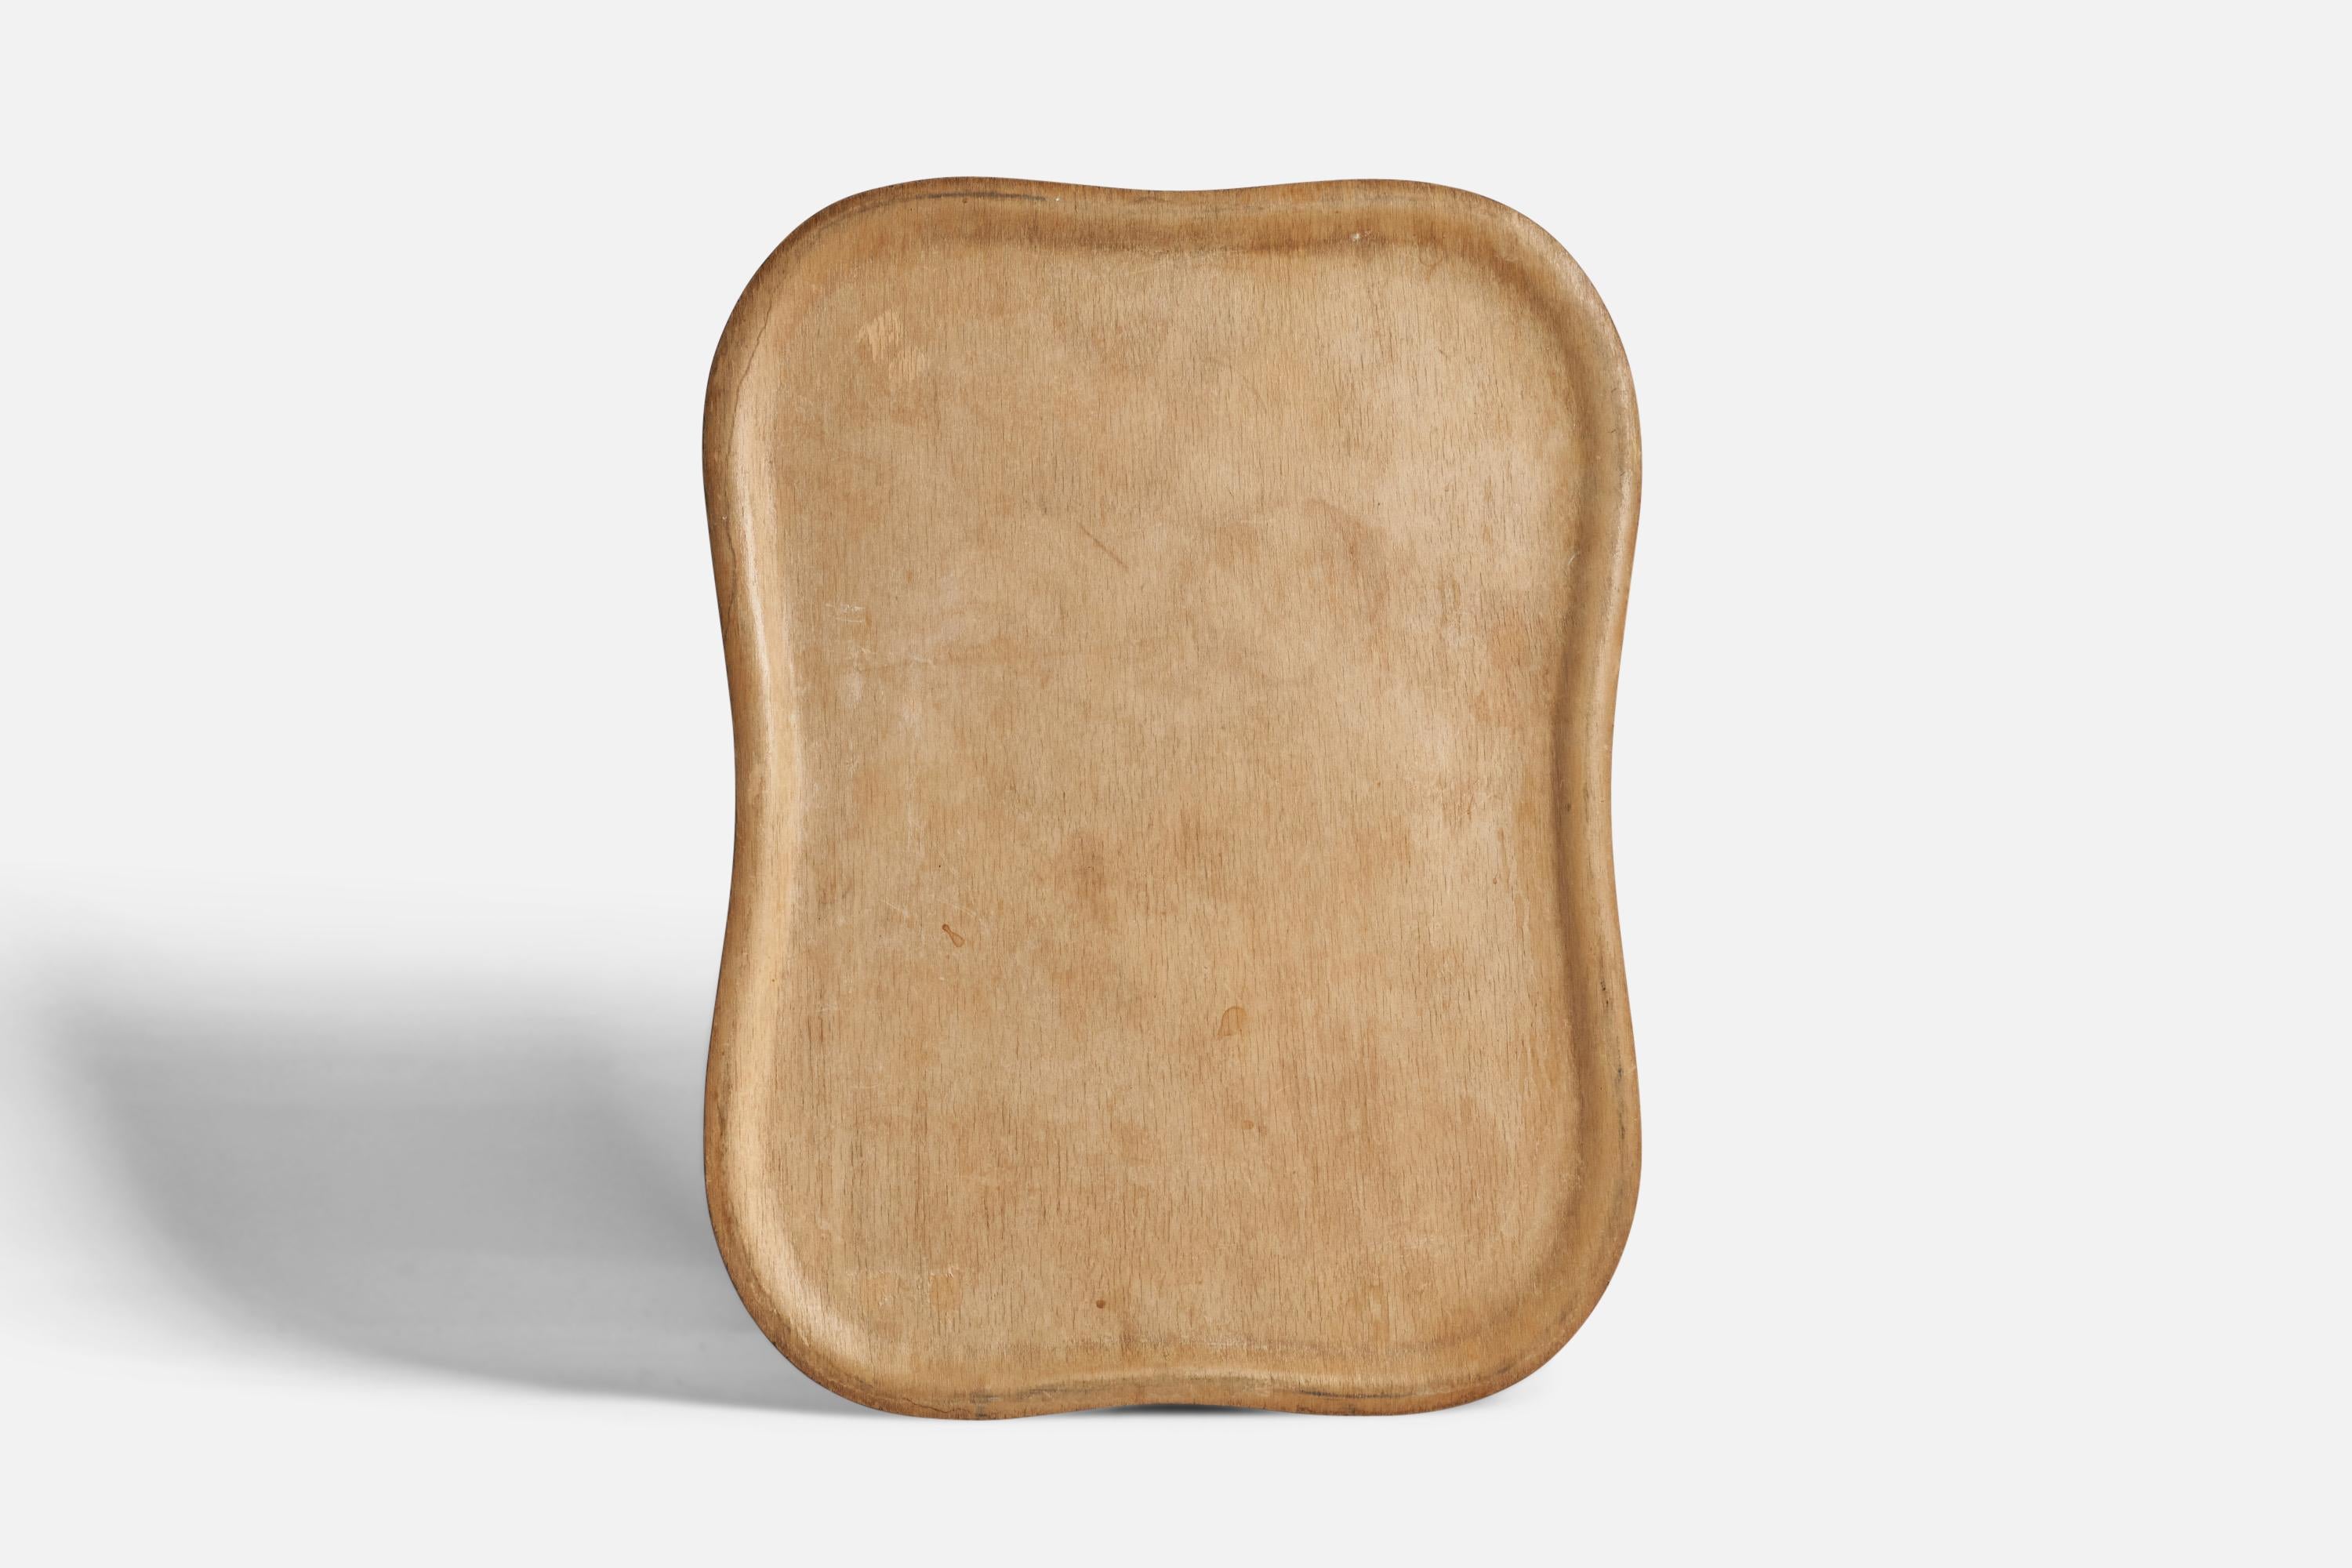 A birch plywood tray designed by Tapio Wirkkala and produced by Soinne & Knioy, Finland, 1950s